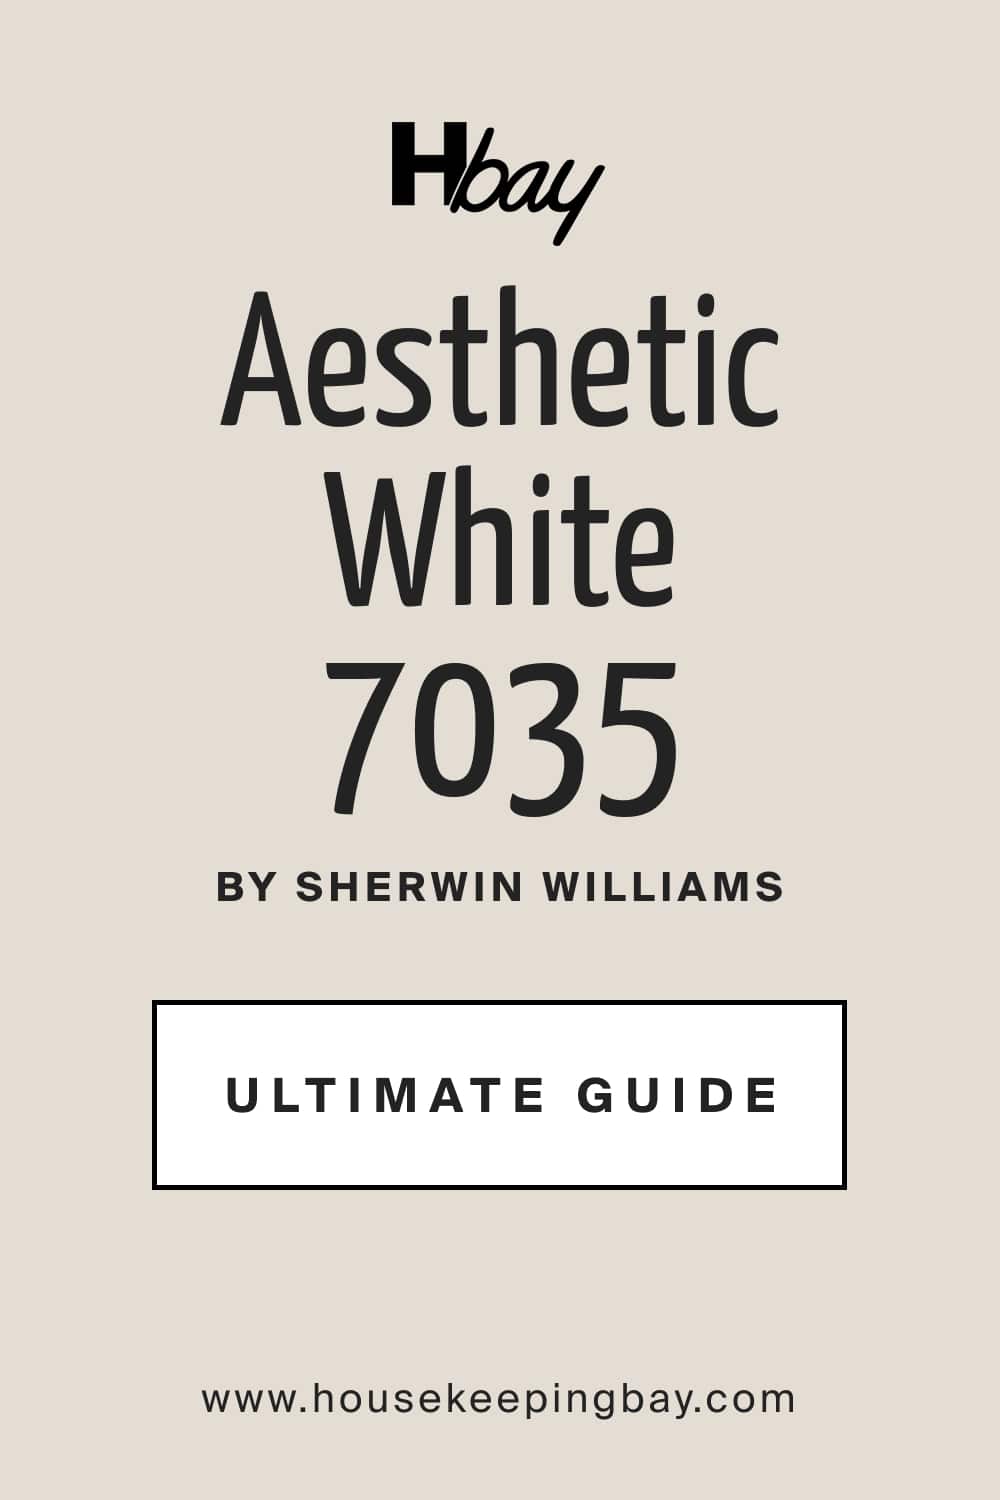 Aesthetic White SW 7035 by Sherwin Williams Ultimate Guide